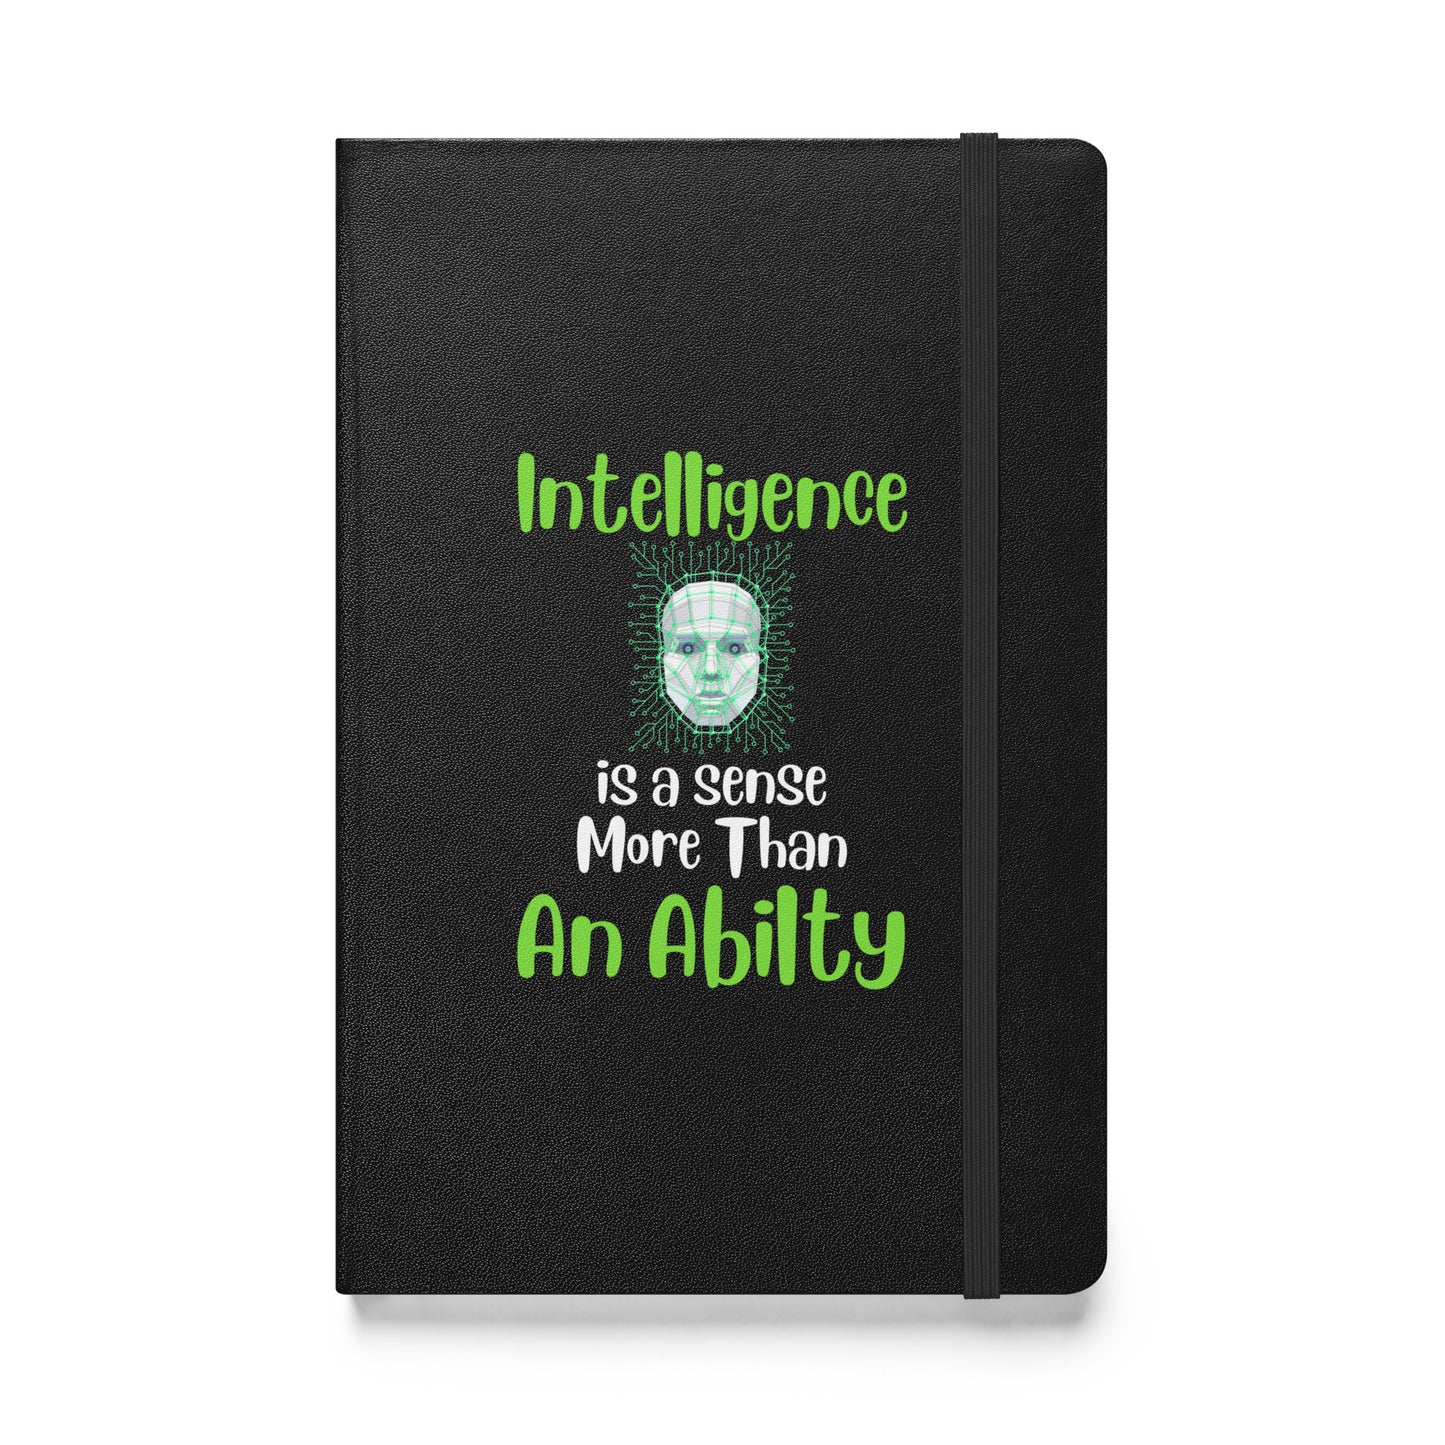 Intelligence is a Sense More Than an Ability Hardcover Bound Journal